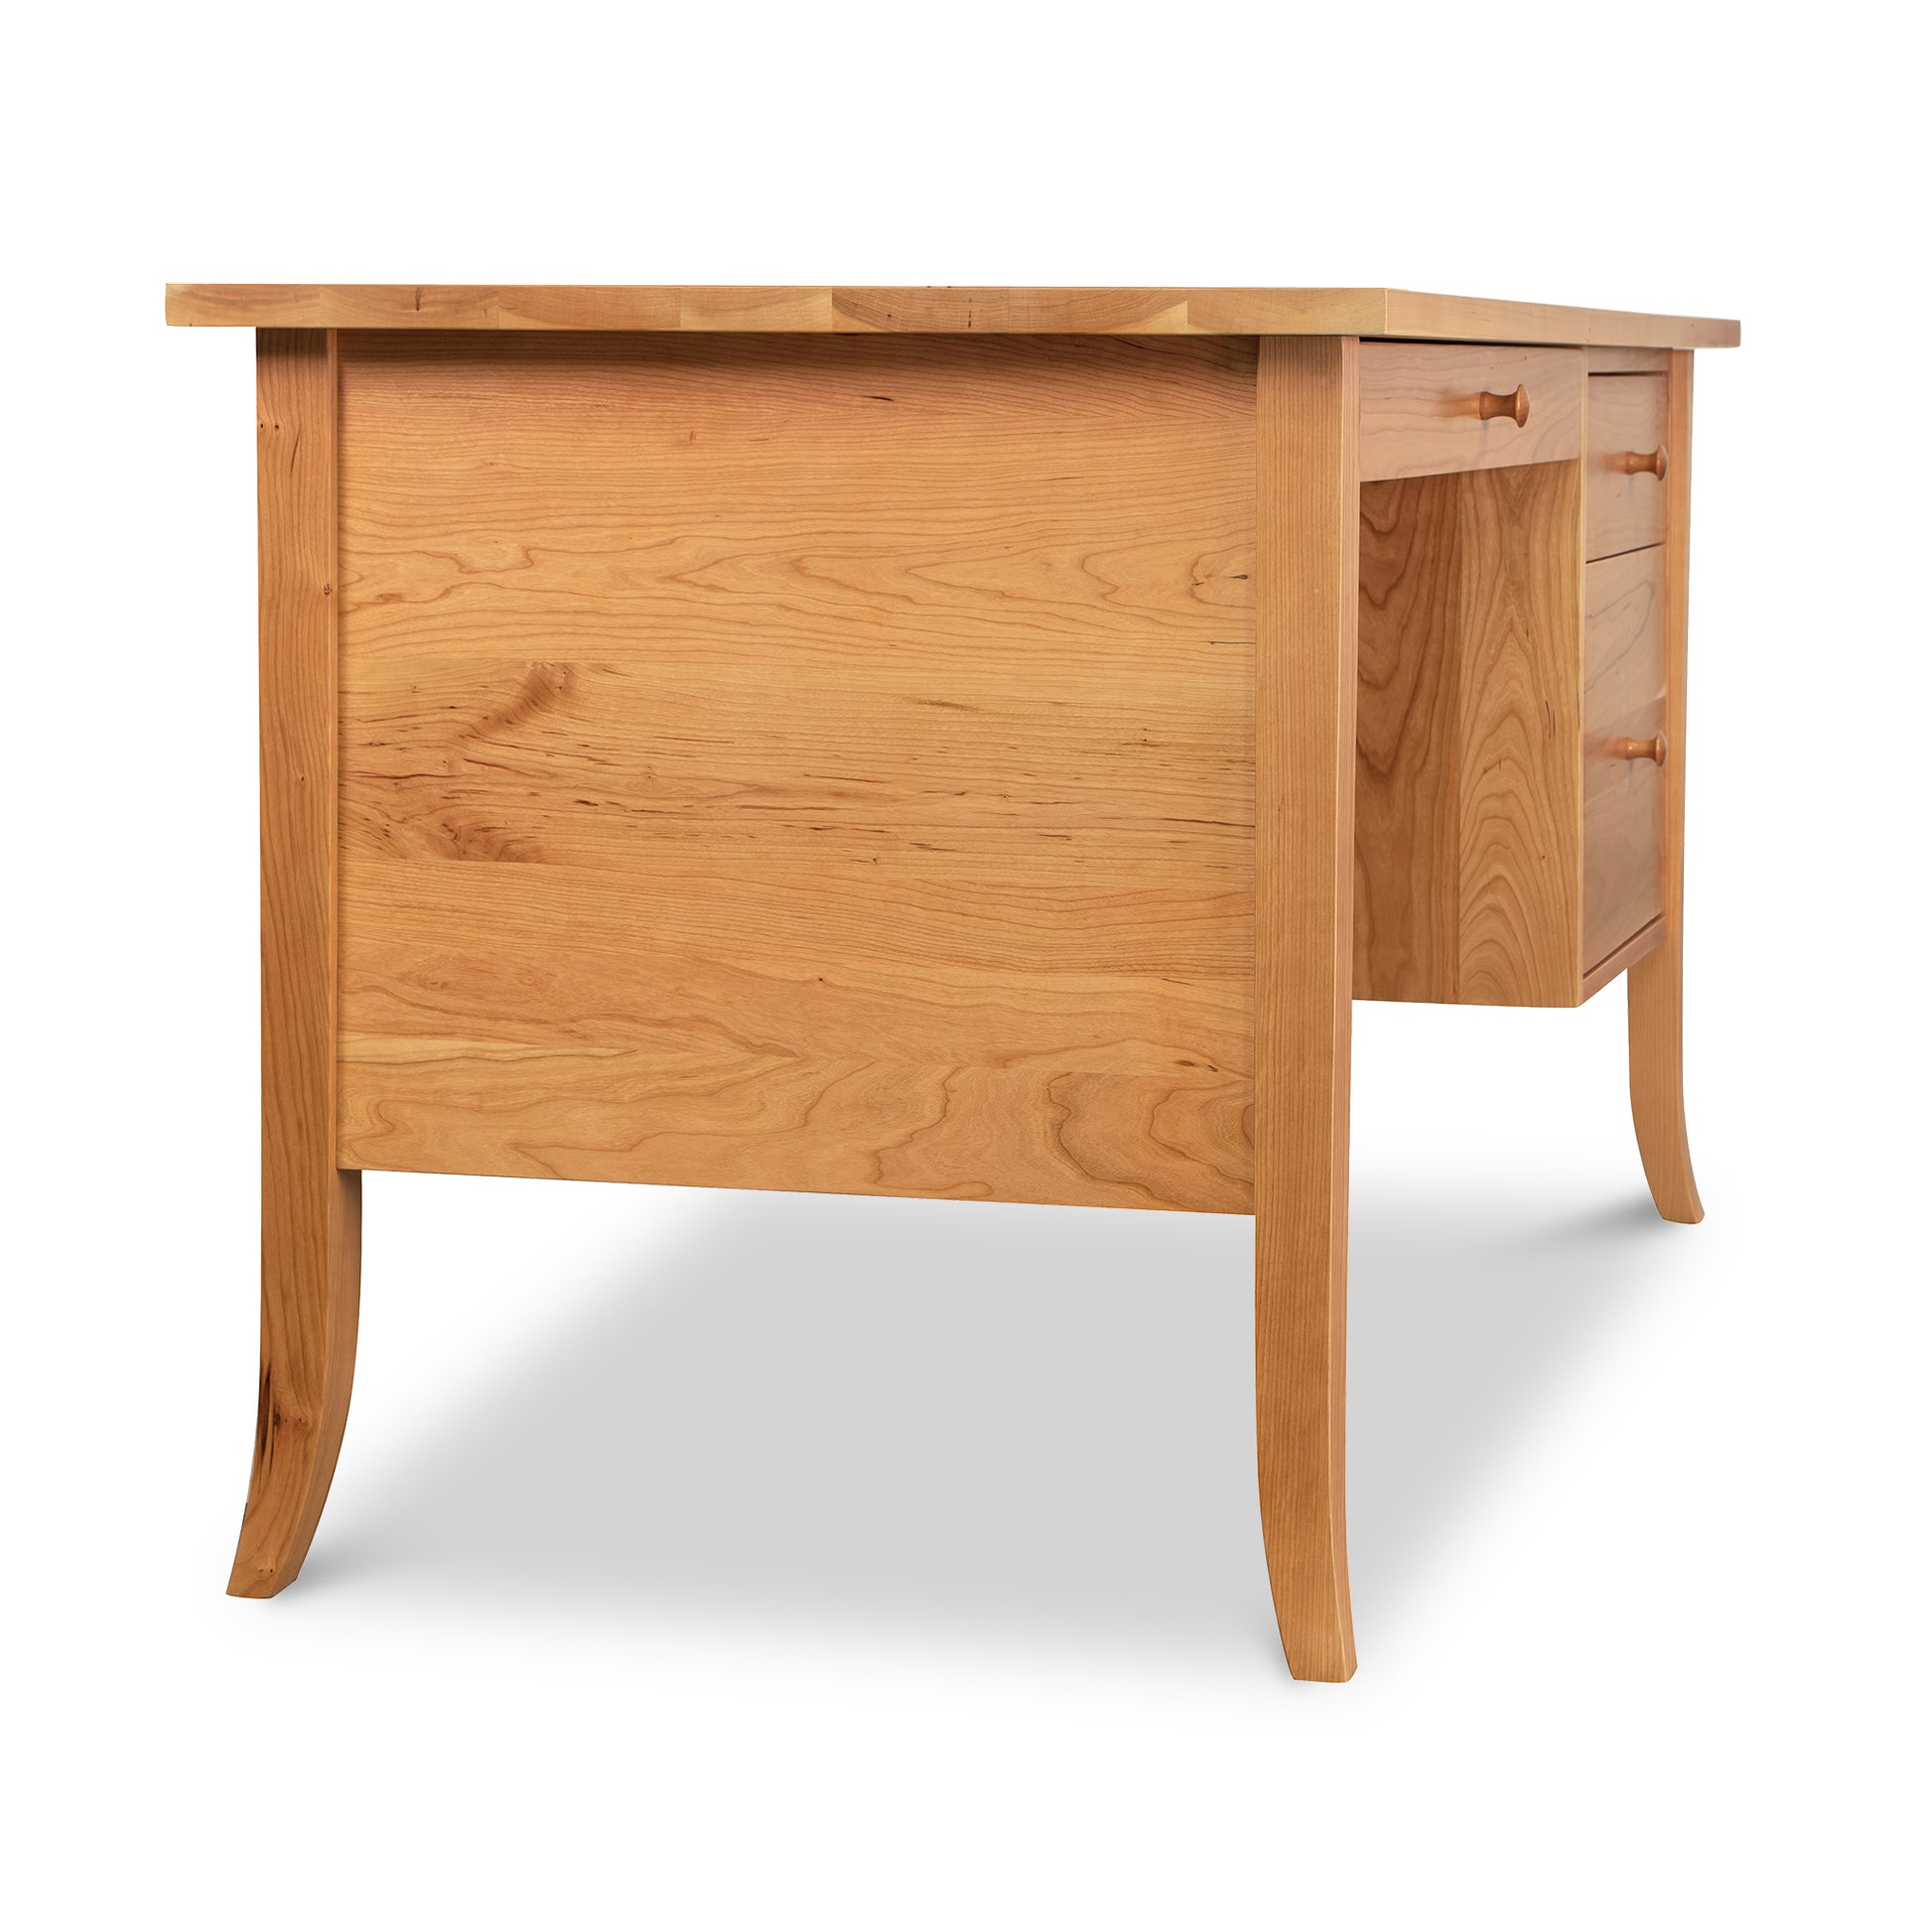 A Small Wood Flare Leg Executive Desk with drawers by Lyndon Furniture.